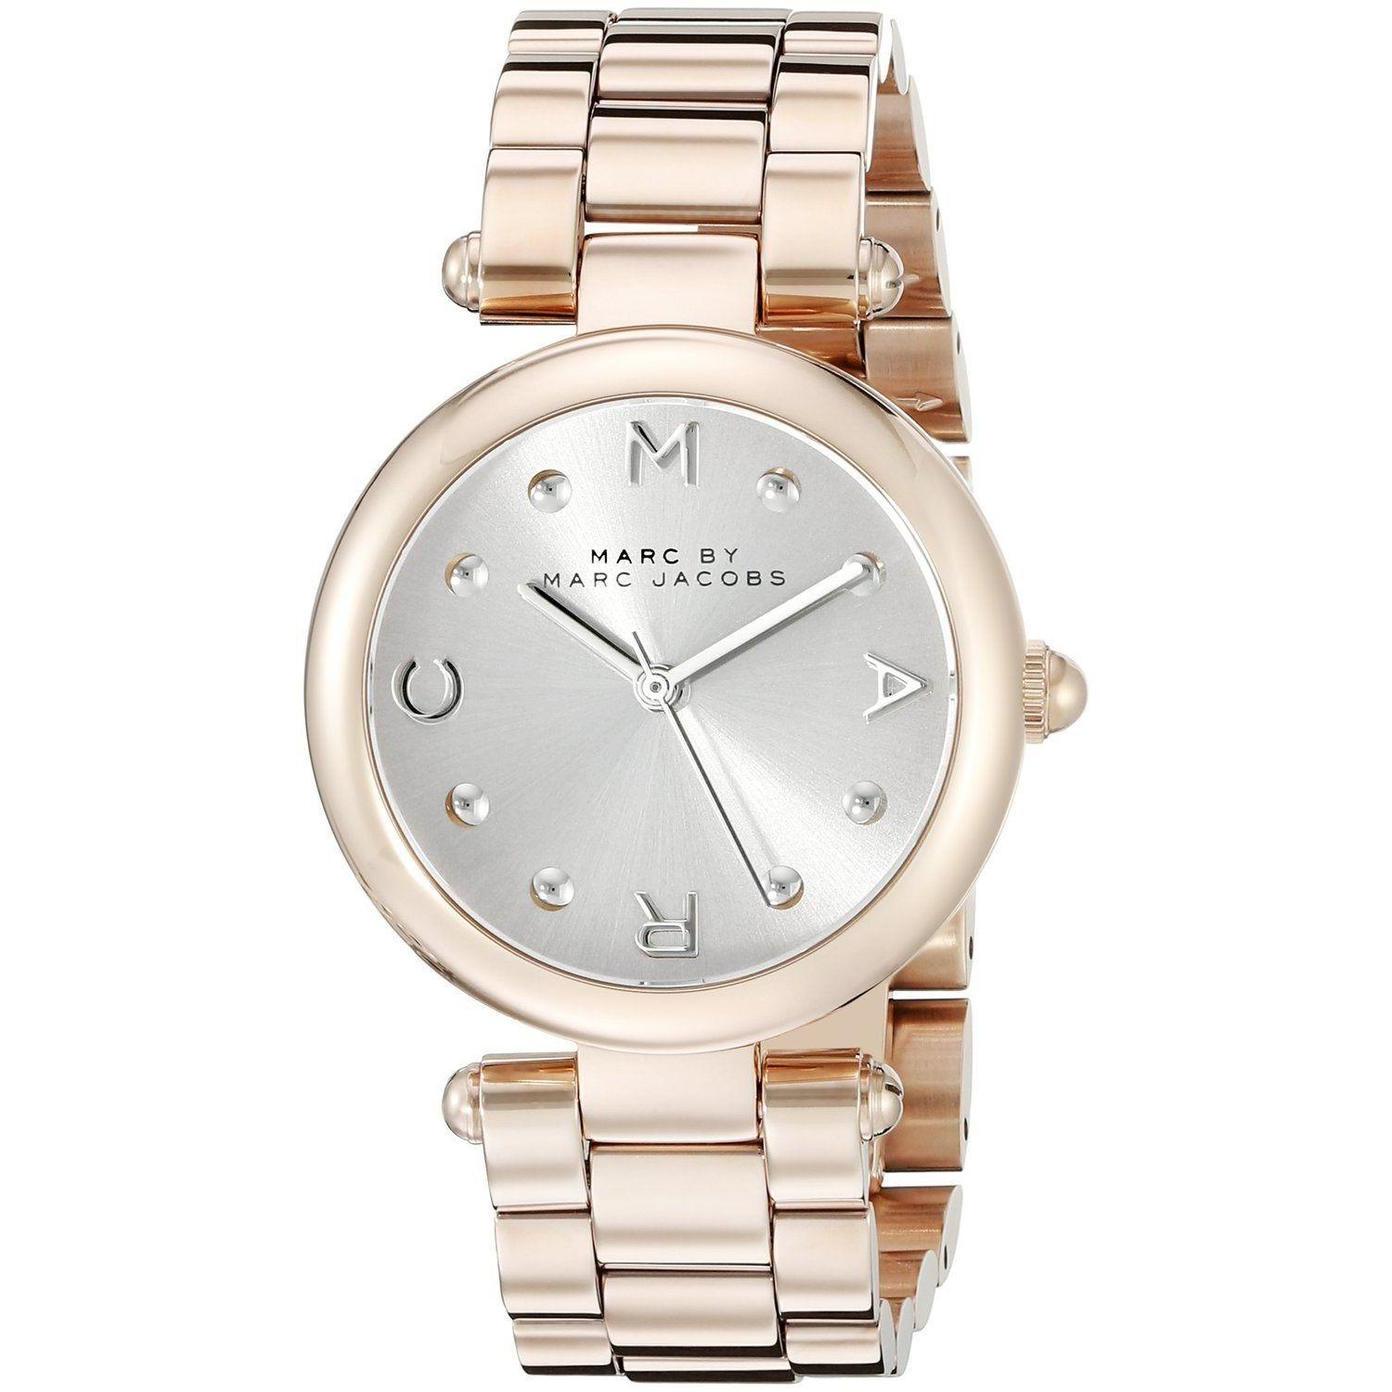 If you are looking Marc by Marc Jacobs Dotty Rose Gold-Tone Bracelet Women's Watch MJ3449 you can buy to tri-state, It is on sale at the best price